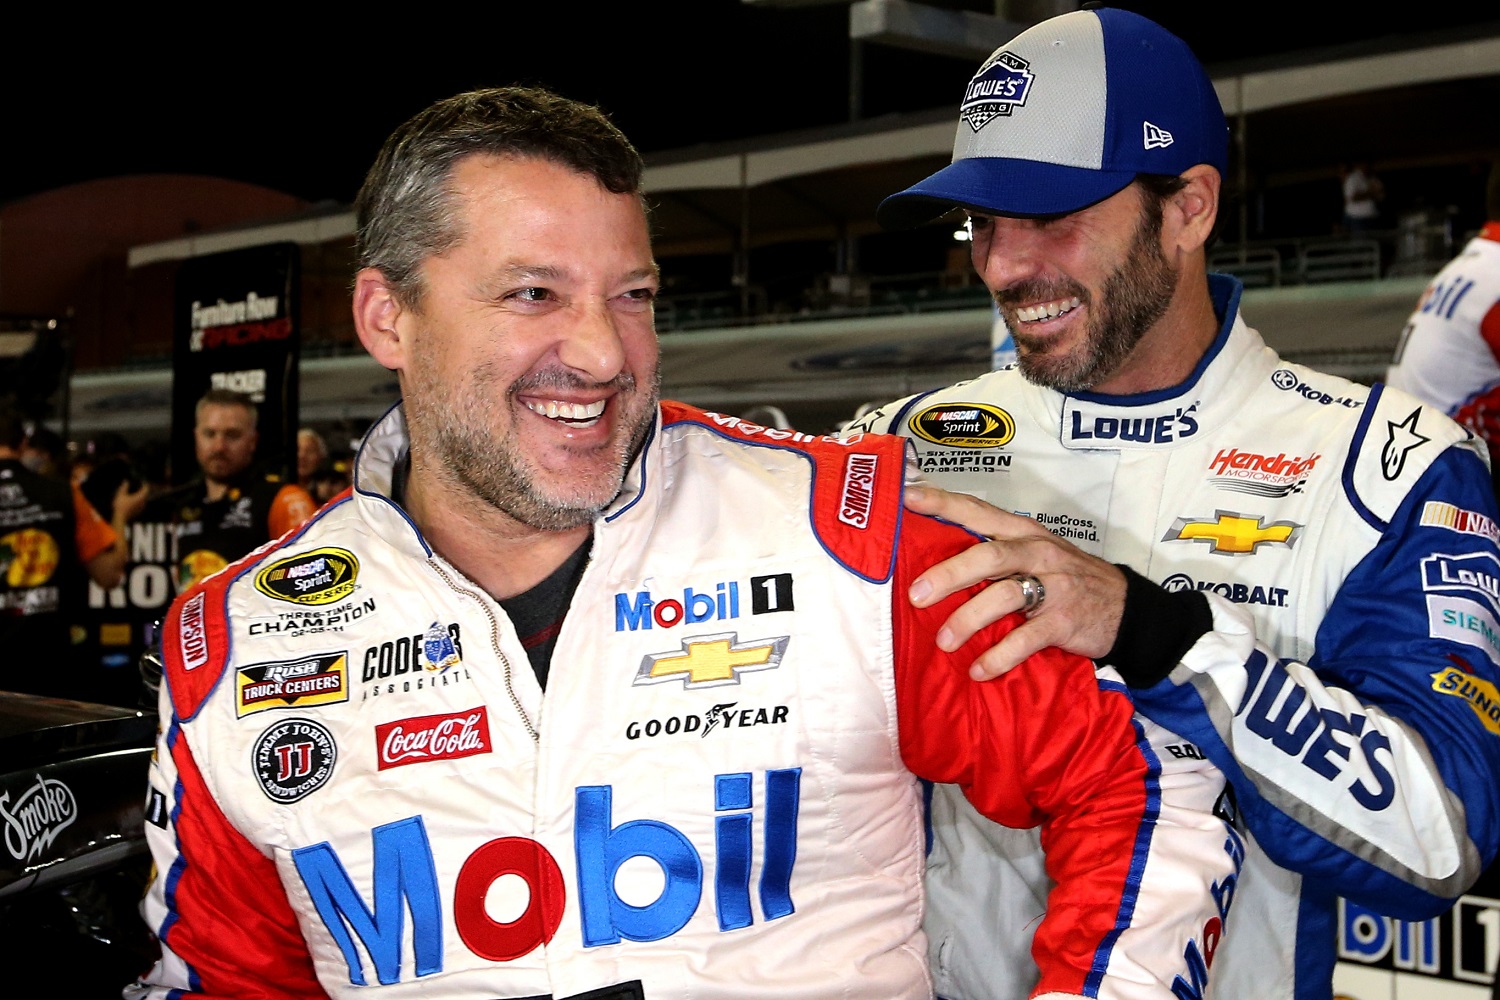 Tony Stewart and Jimmie Johnson joke around on the grid during qualifying for the NASCAR Sprint Cup Series Ford EcoBoost 400 at Homestead-Miami Speedway on Nov. 18, 2016. | Sean Gardner/NASCAR via Getty Images